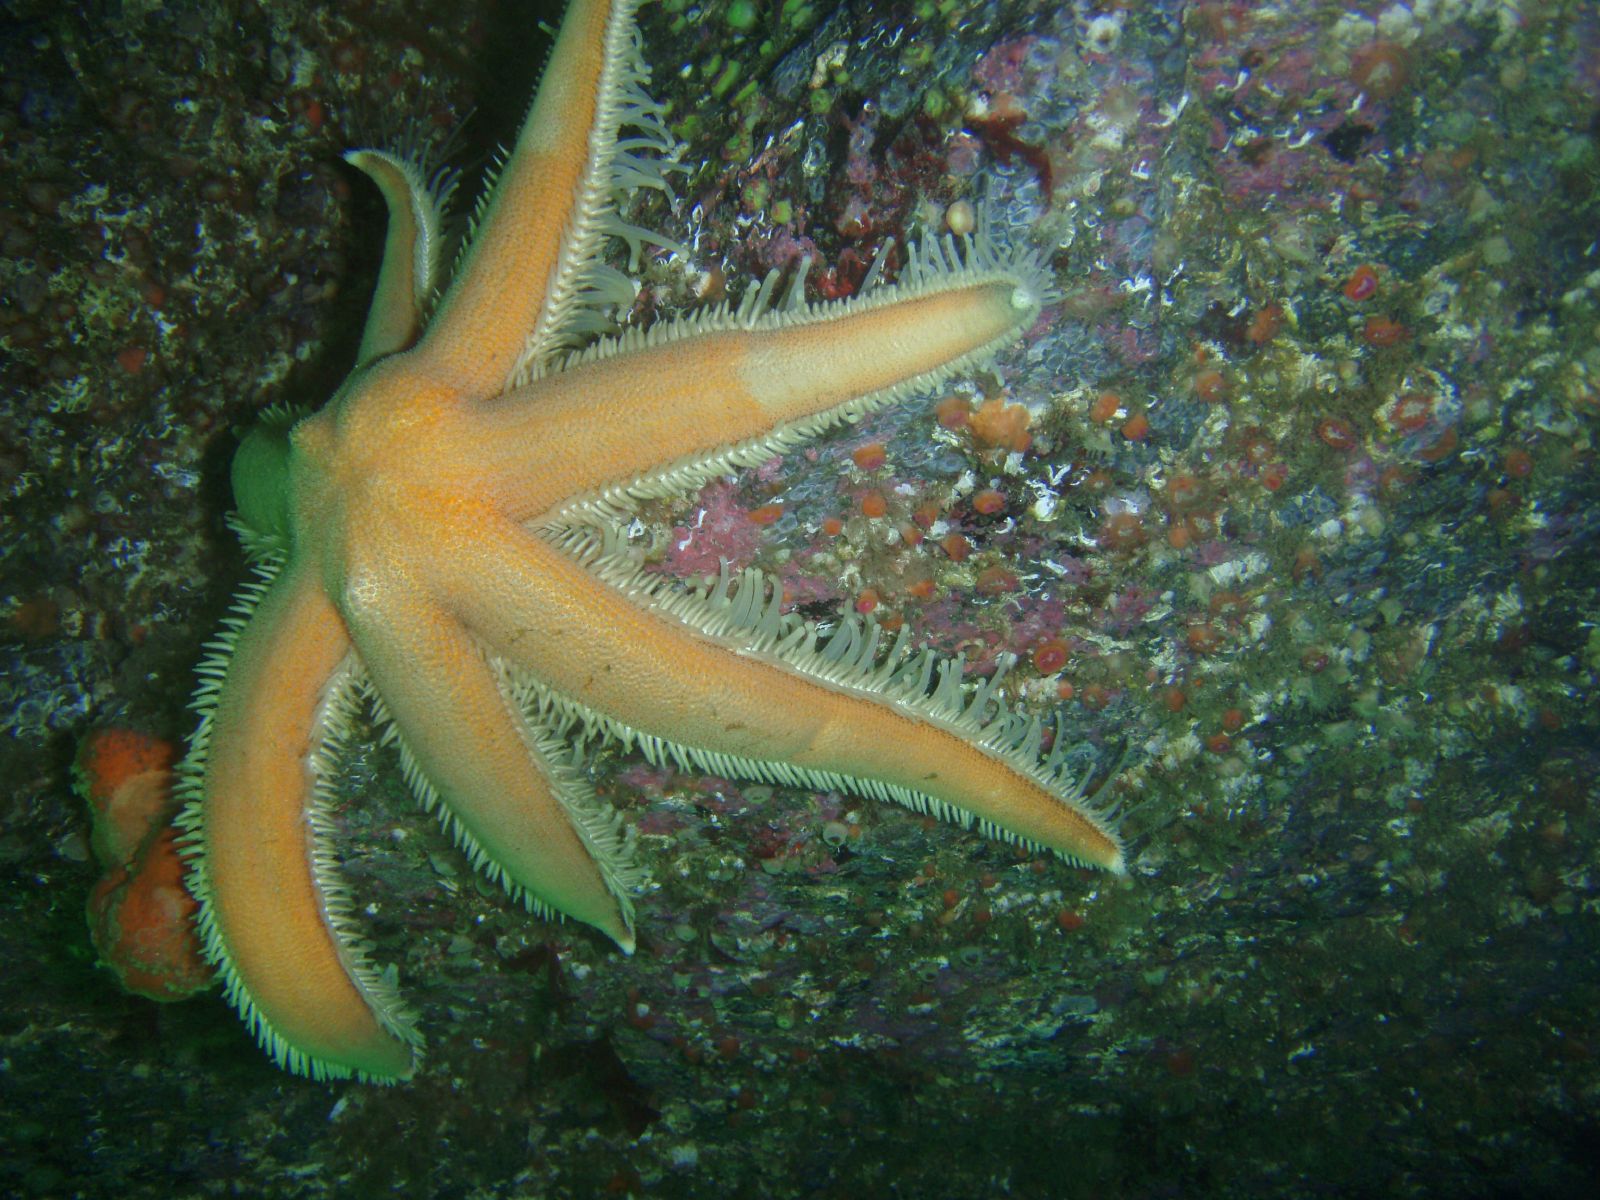 a large starfish on the sea floor with a sponged surface